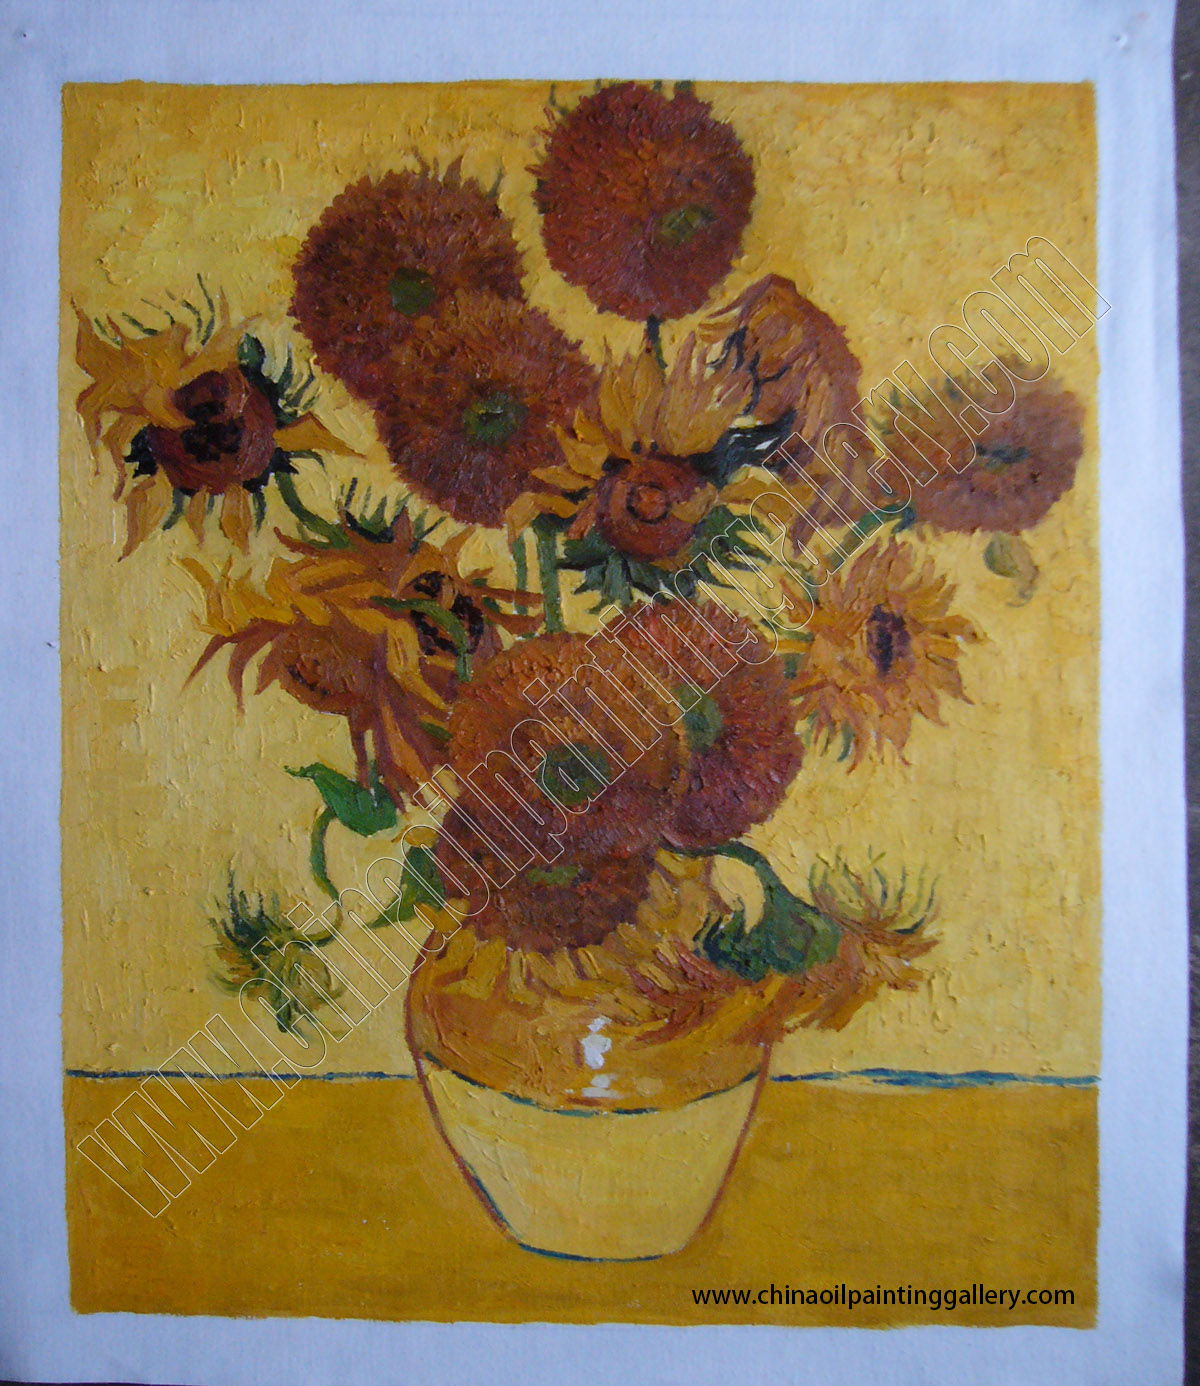 Vincent van Gogh Sunflowers - Oil painting reproductions 2